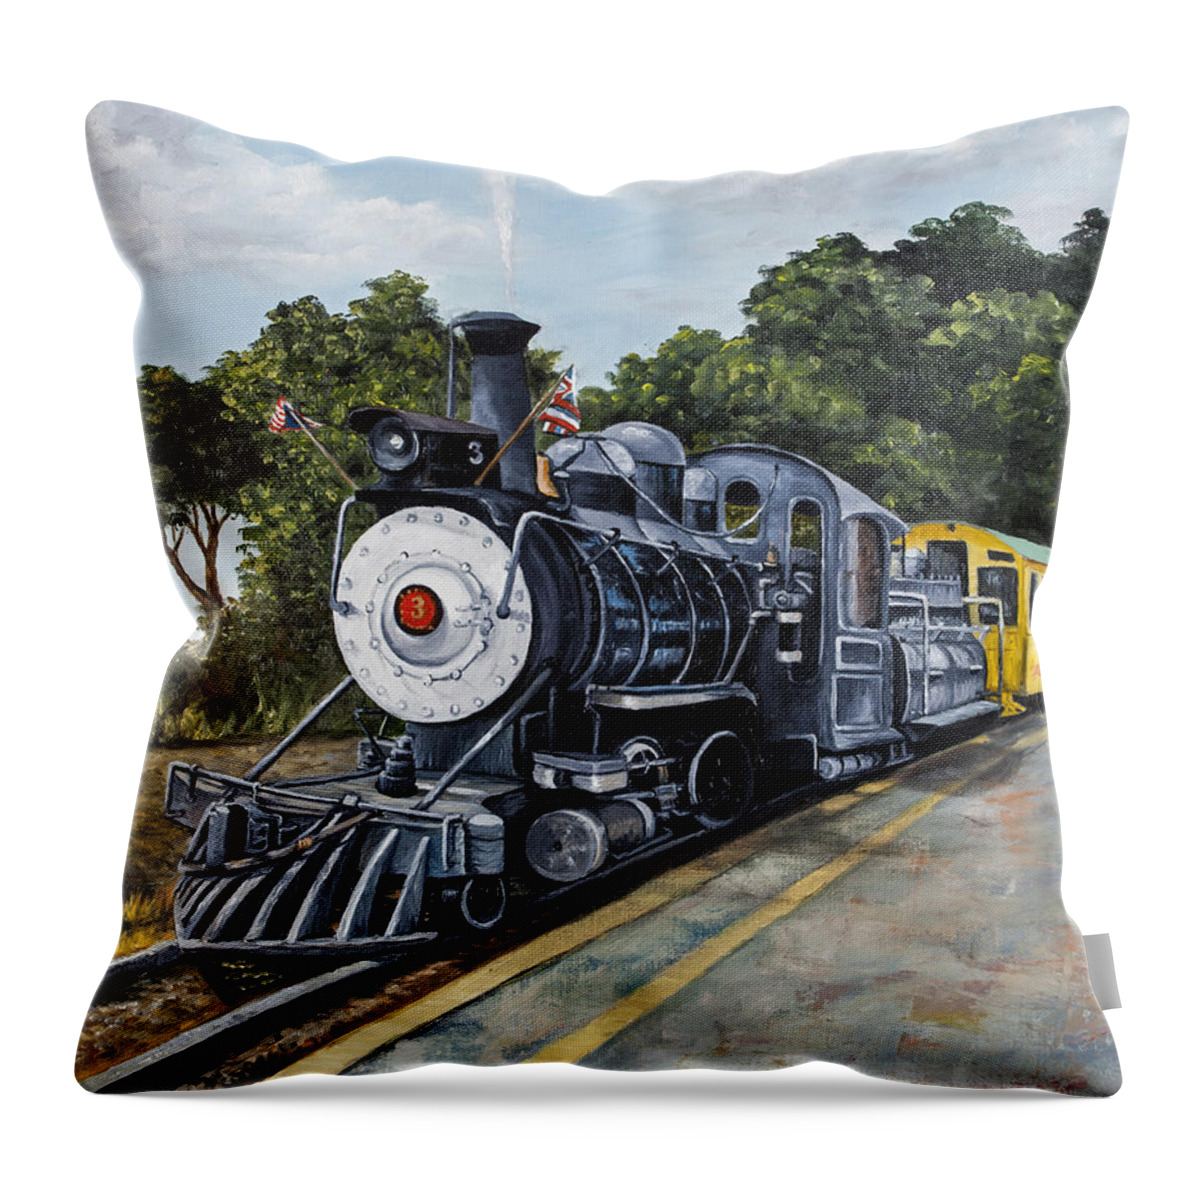 Transportation Throw Pillow featuring the painting Sugar Cane Train #2 by Darice Machel McGuire